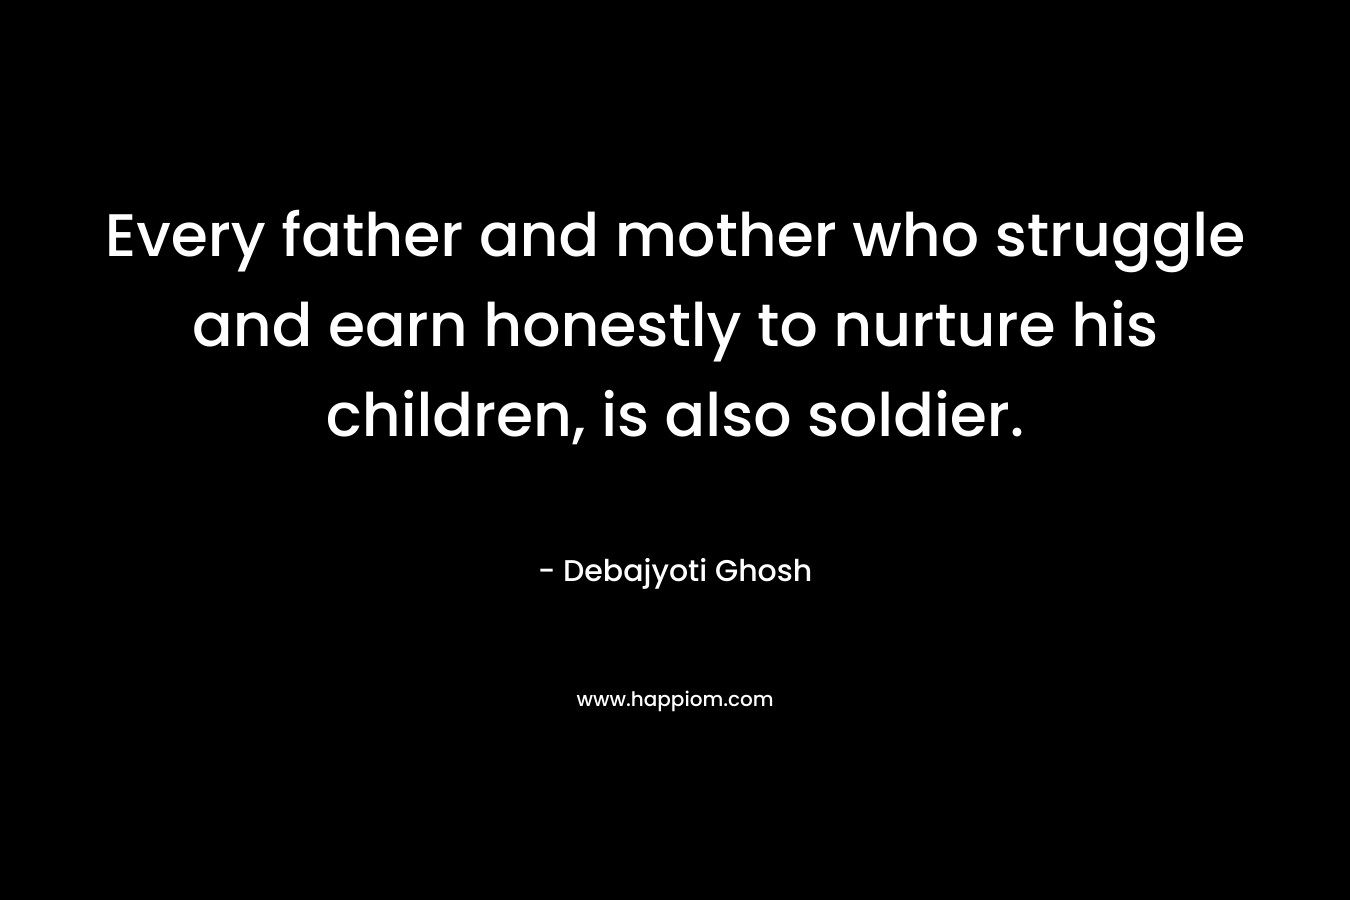 Every father and mother who struggle and earn honestly to nurture his children, is also soldier.